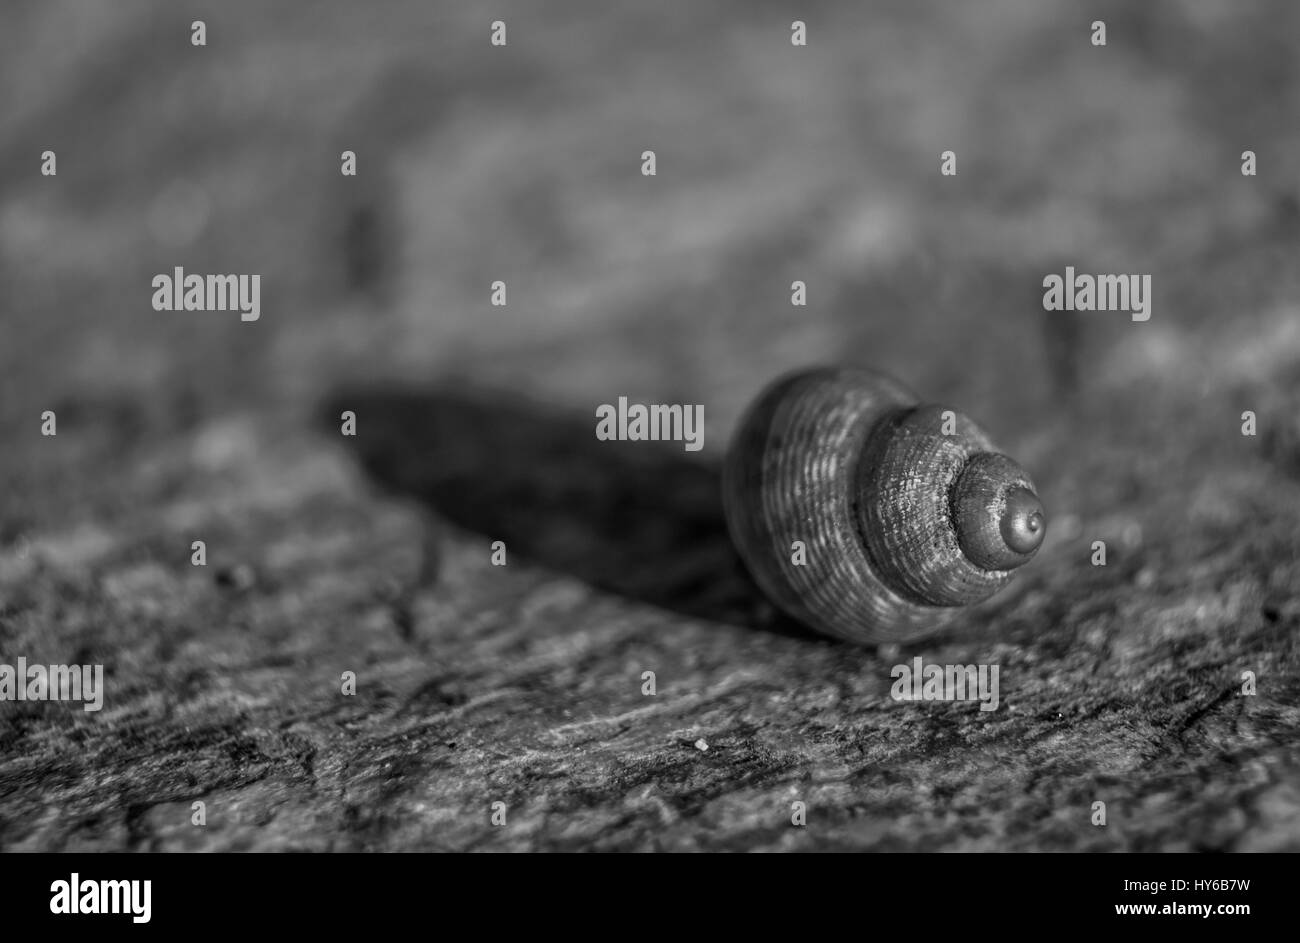 Macro shot of a tiny snail in black and white. Stock Photo